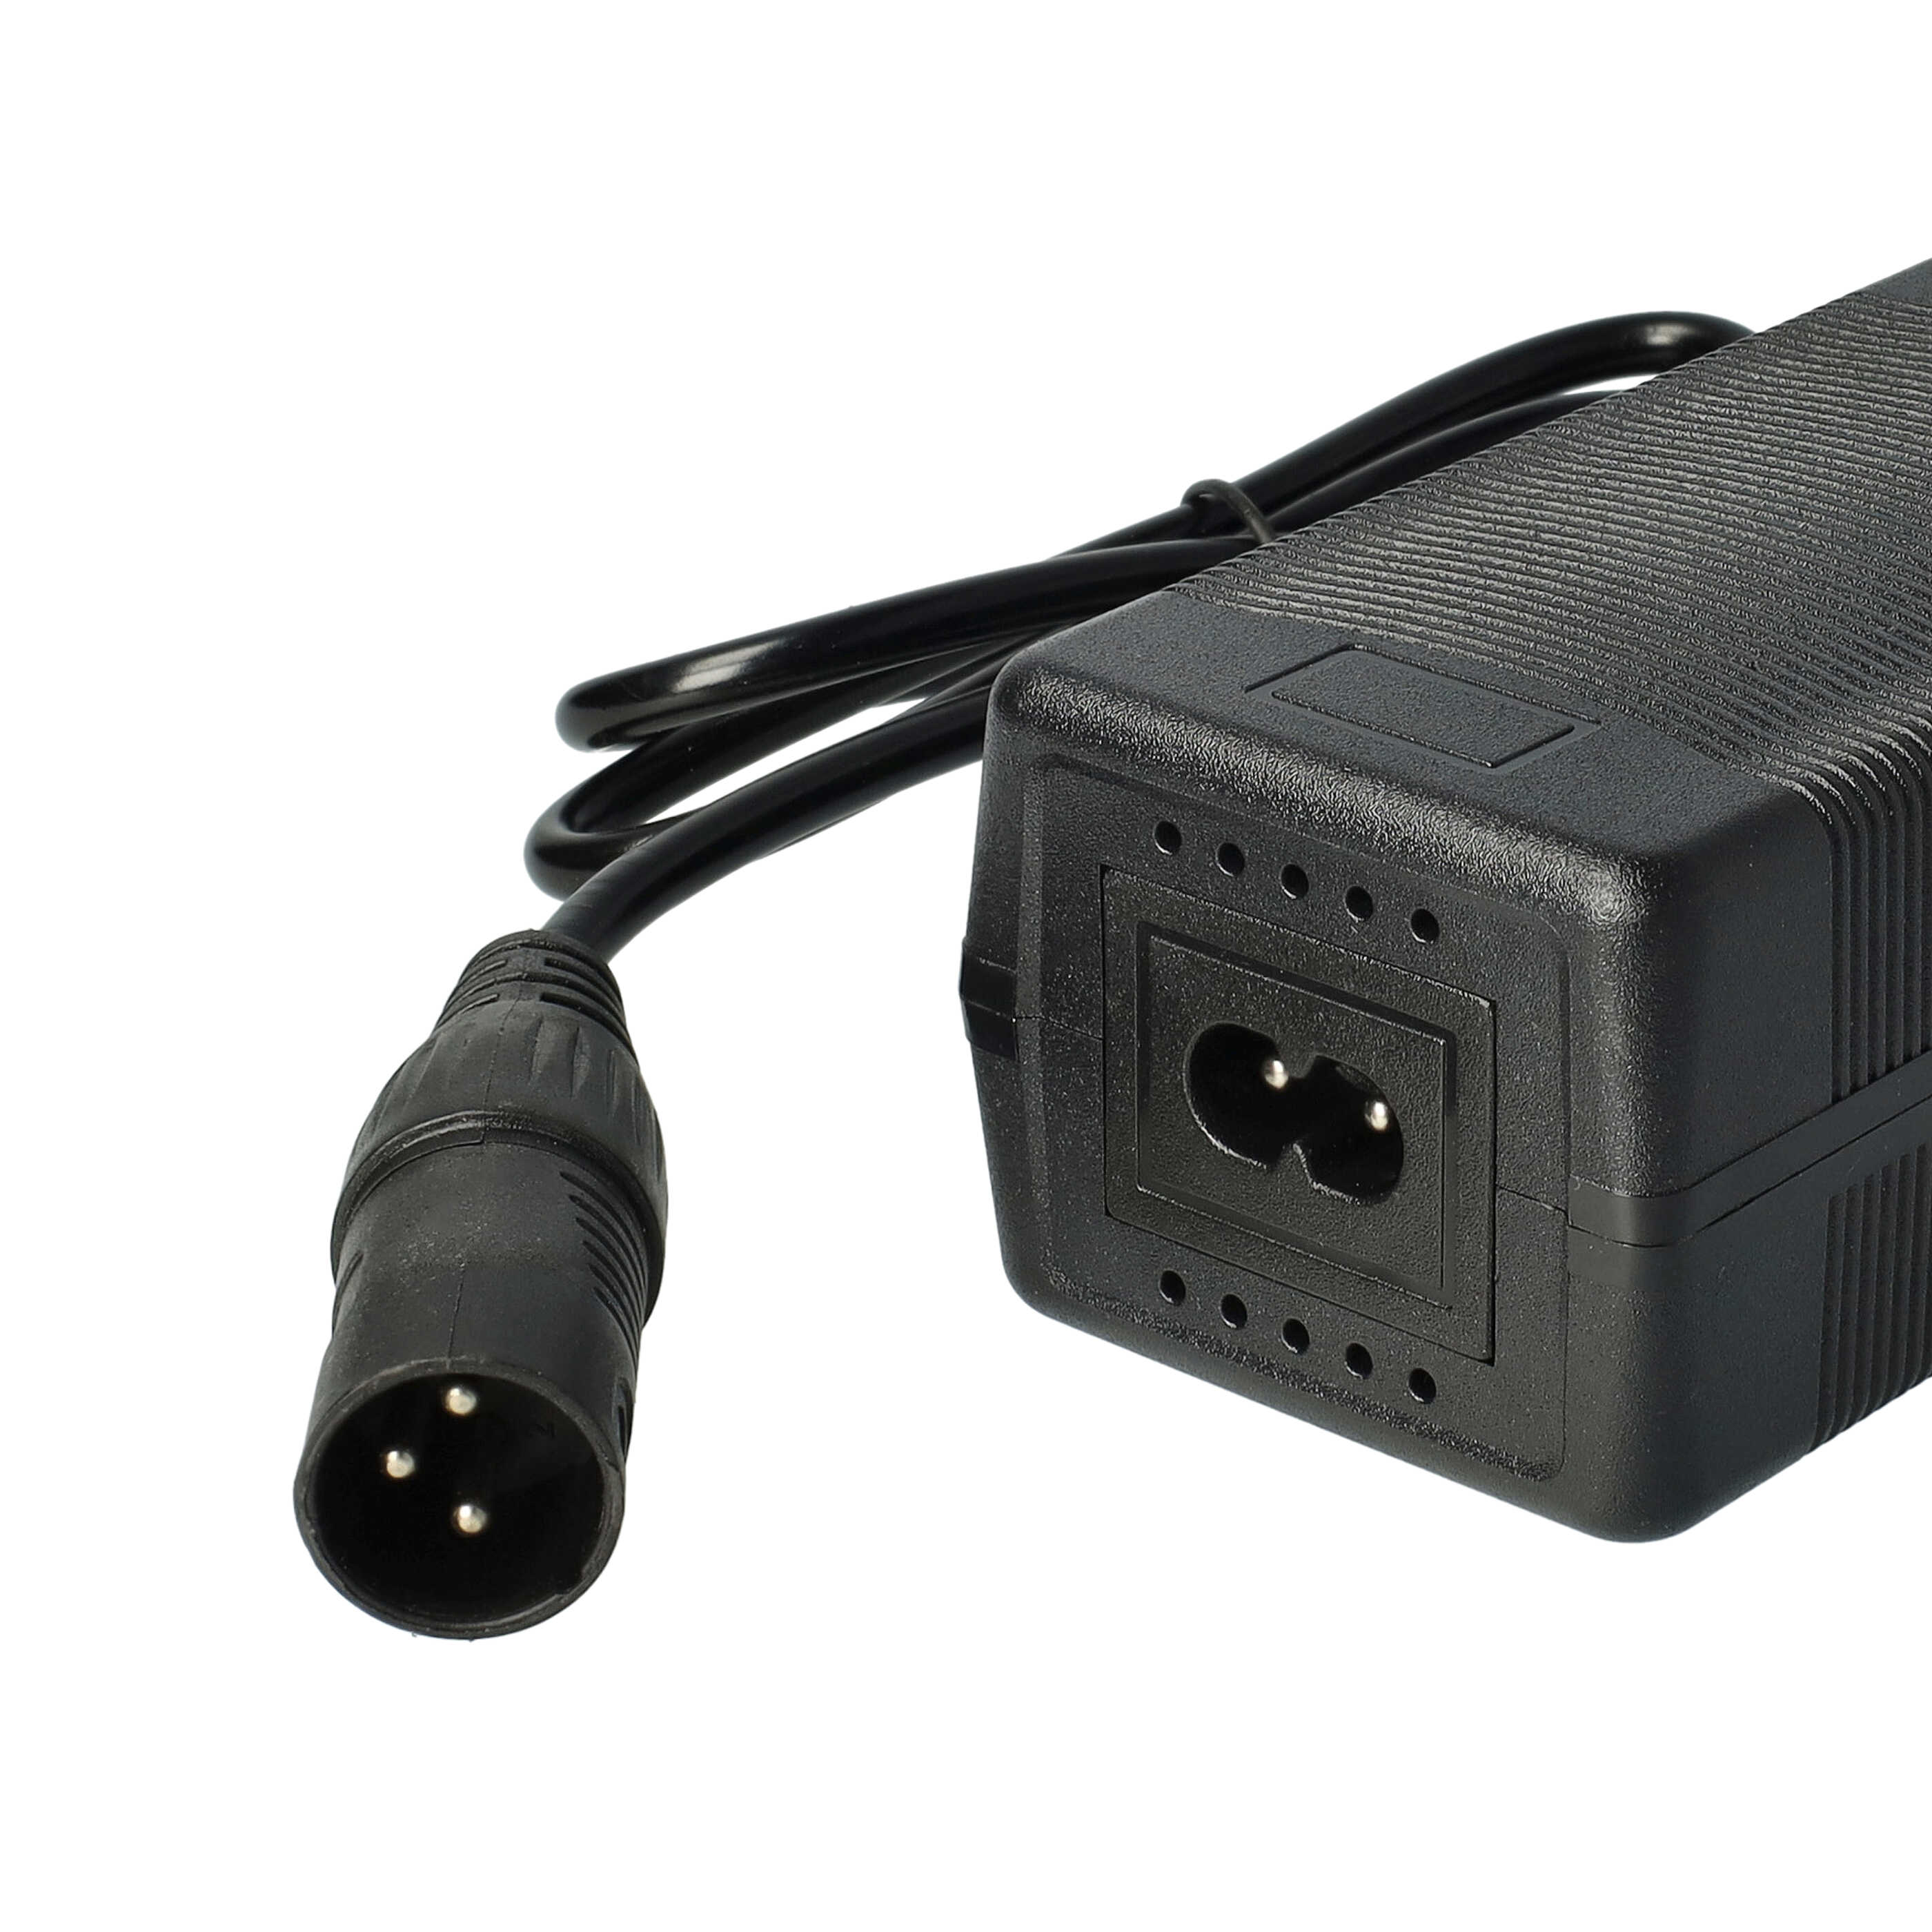 Charger replaces HP1202L2 for Li-Ion E-Bike Battery etc. - With 3 Pin Connector, With XLR Connector, 2.35 A